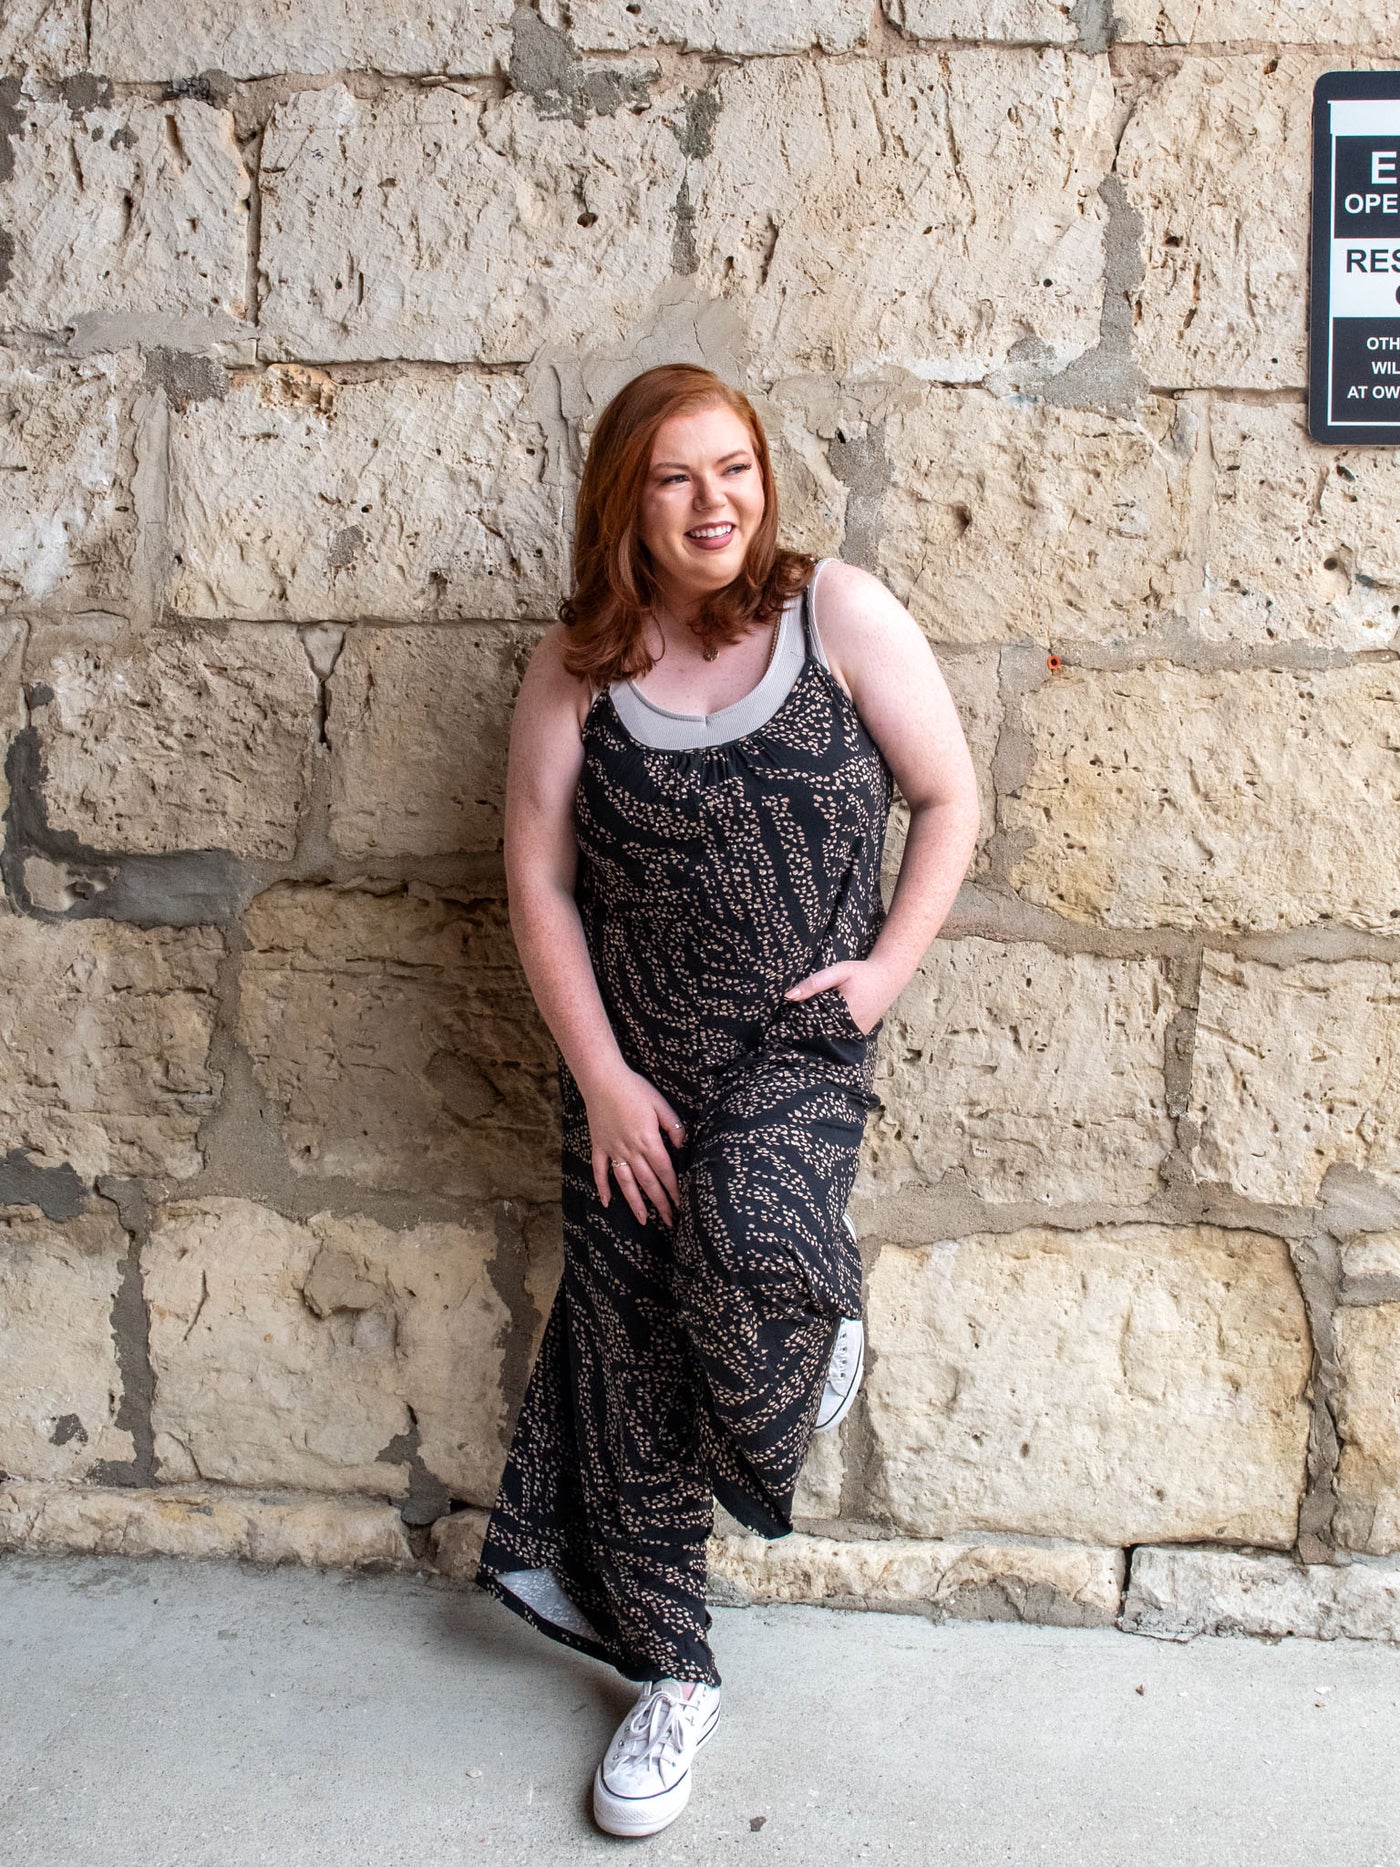 A model wearing a flared leg, black, animal print jumpsuit. She has it layered over a light gray tank top and white sneakers.